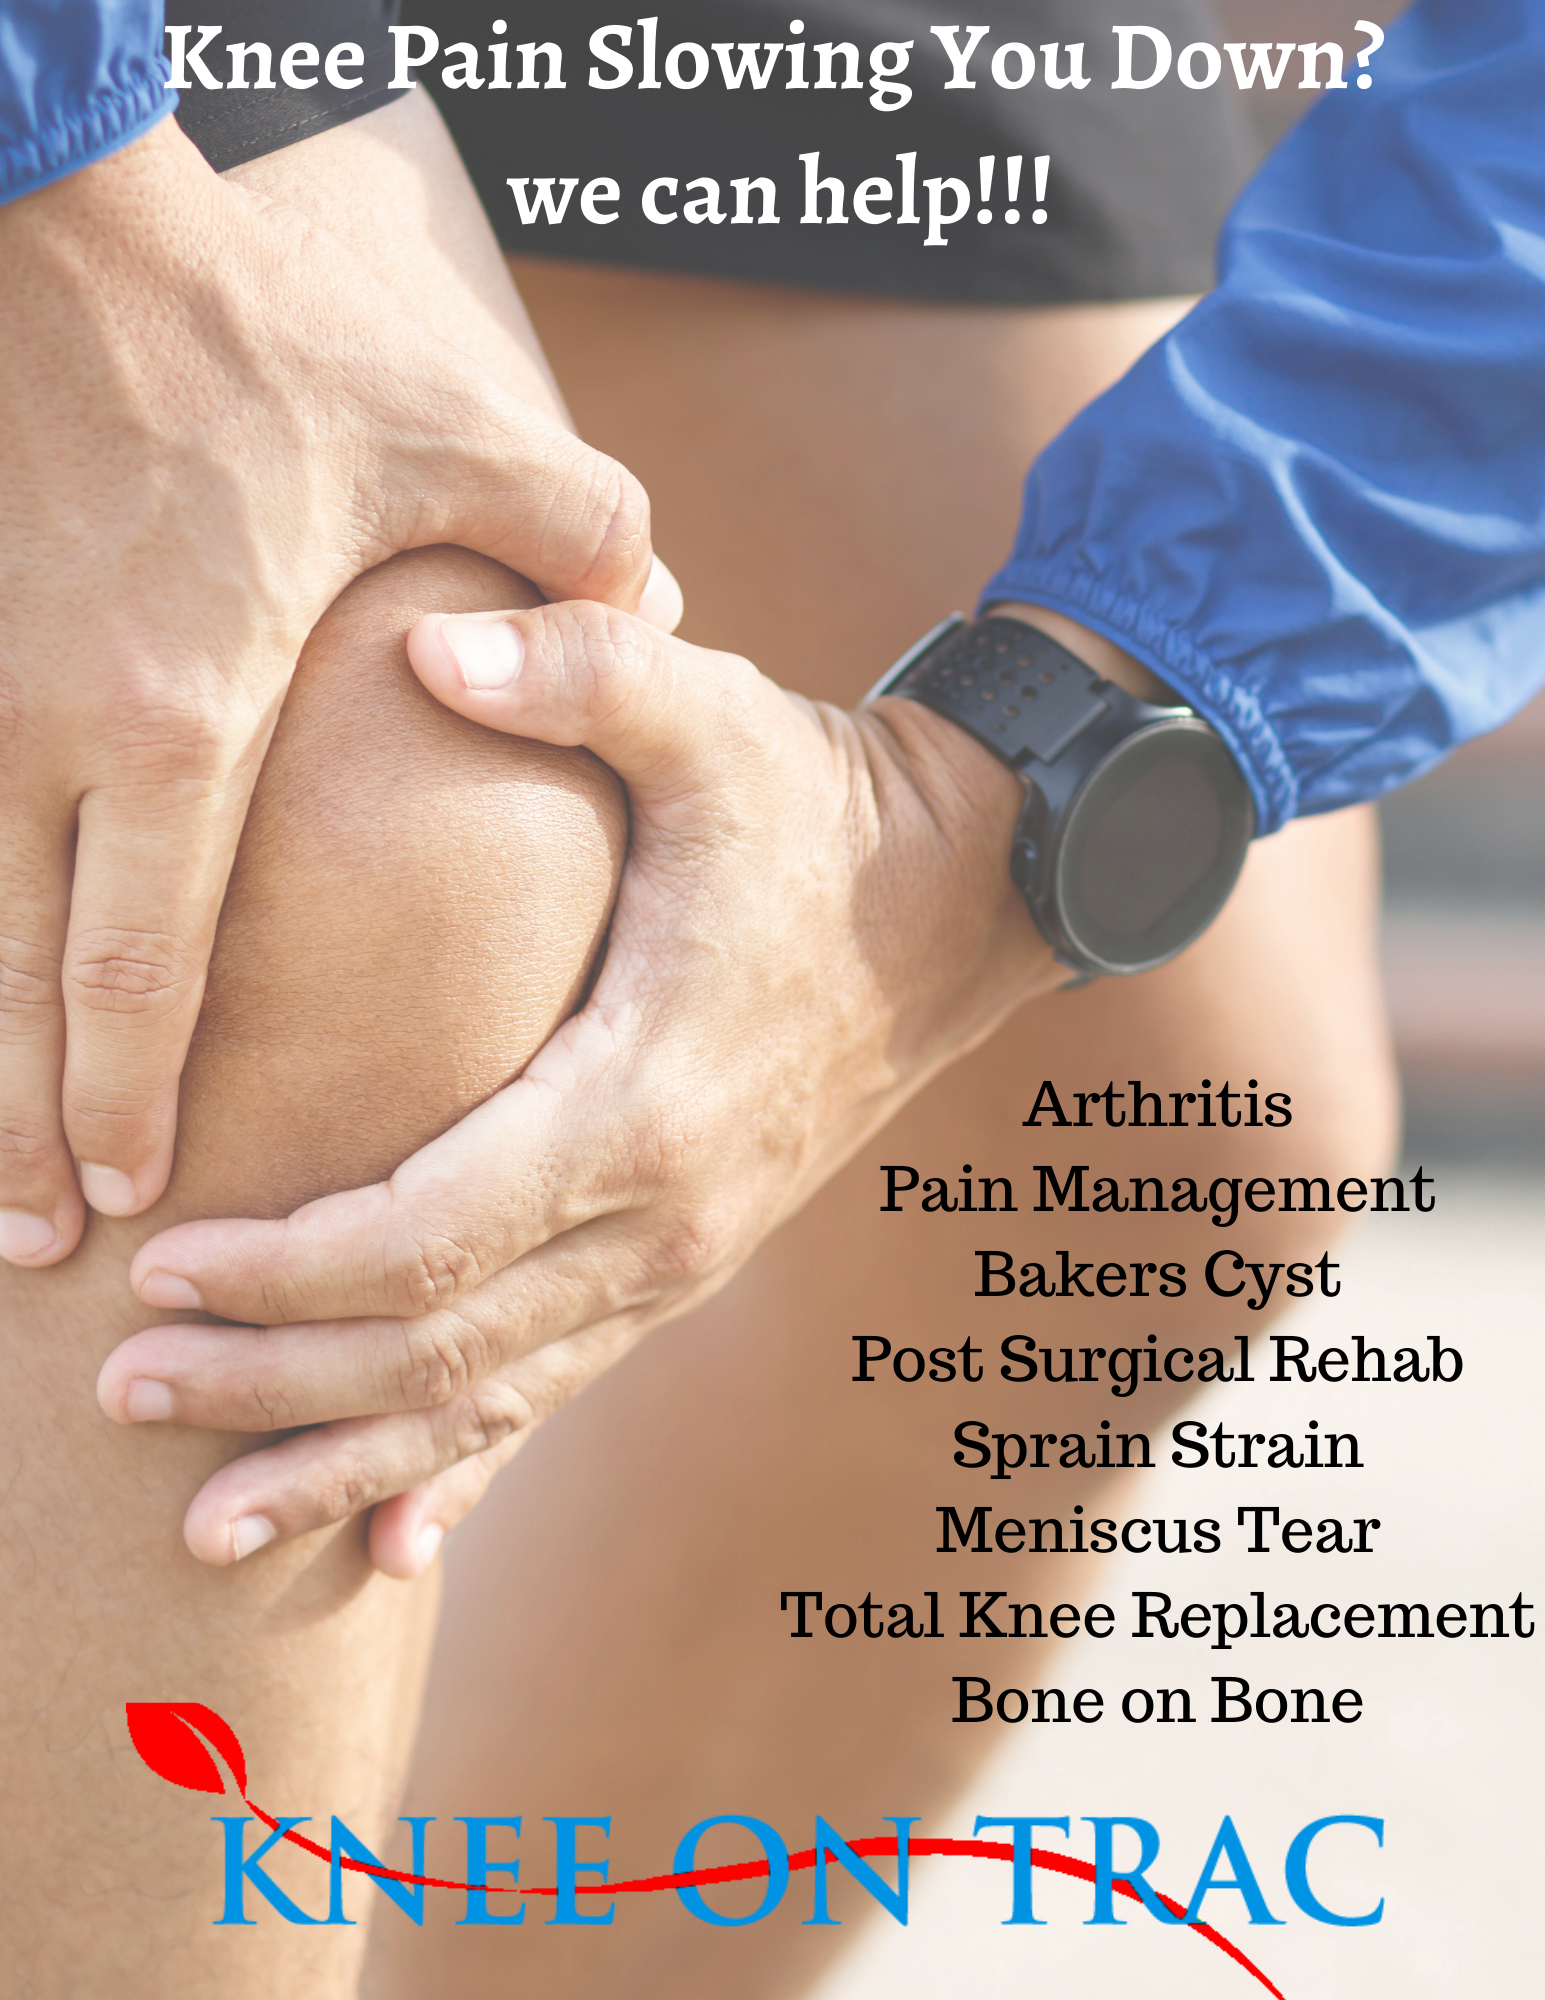 Copy of Knee Pain Slowing You Down  Newsletter 